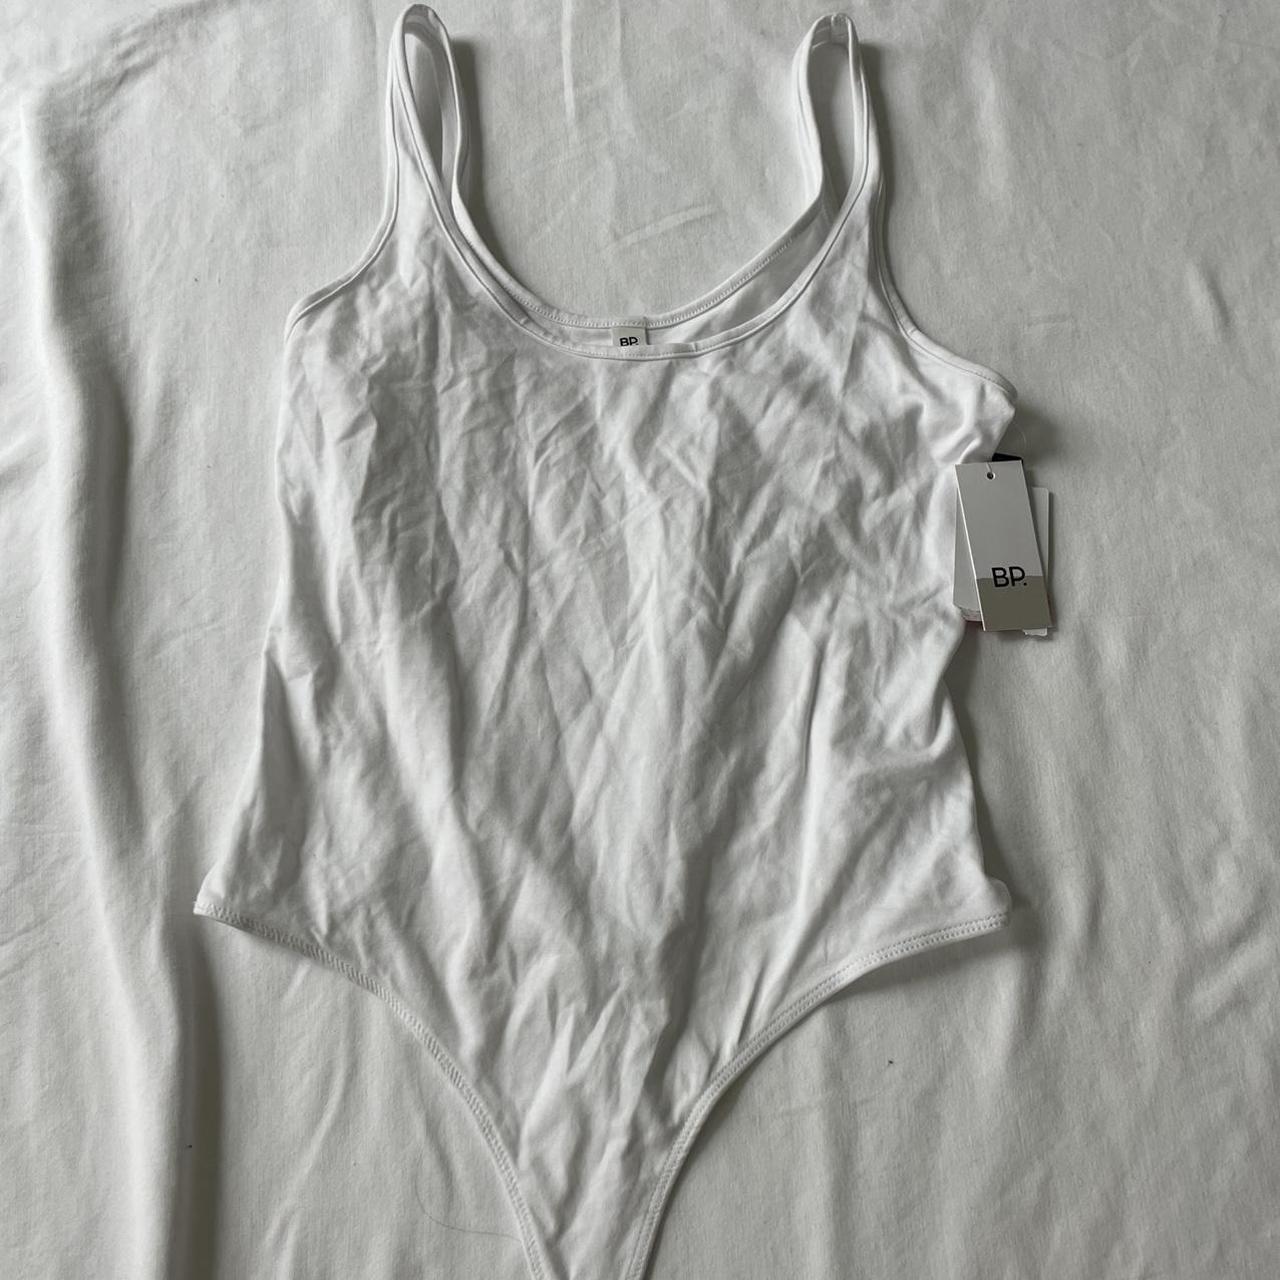 Nordstrom | BP | White Bodysuit | Size M | With Tags... - Depop